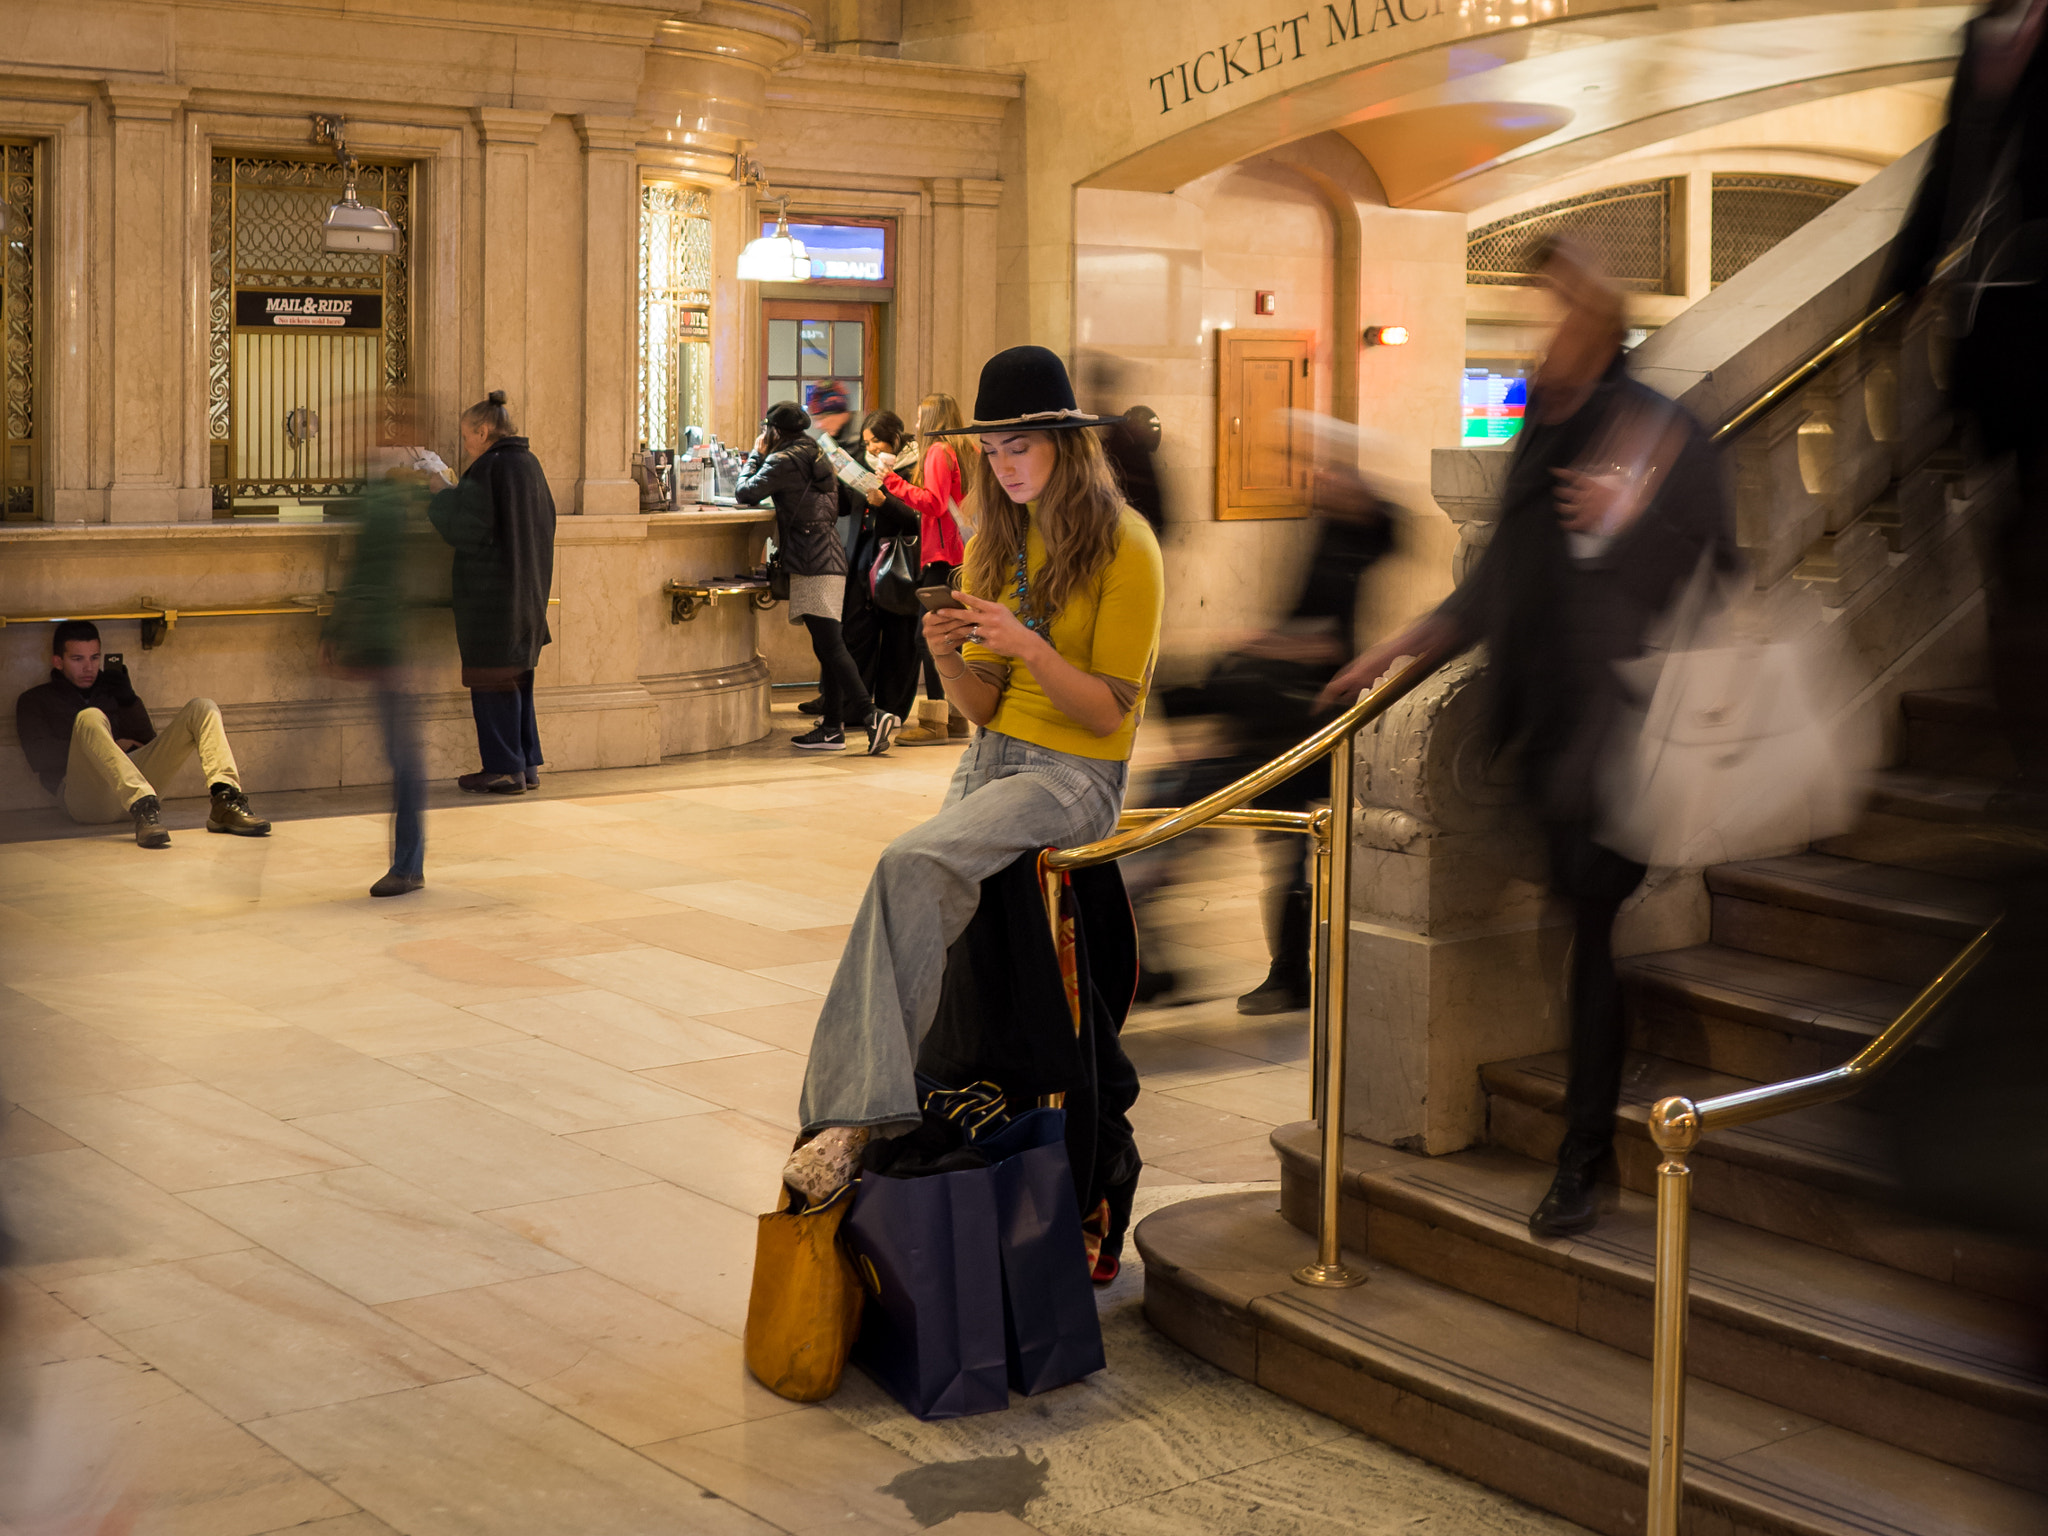 Olympus OM-D E-M10 II + Sigma 19mm F2.8 DN Art sample photo. Grand central terminal photography